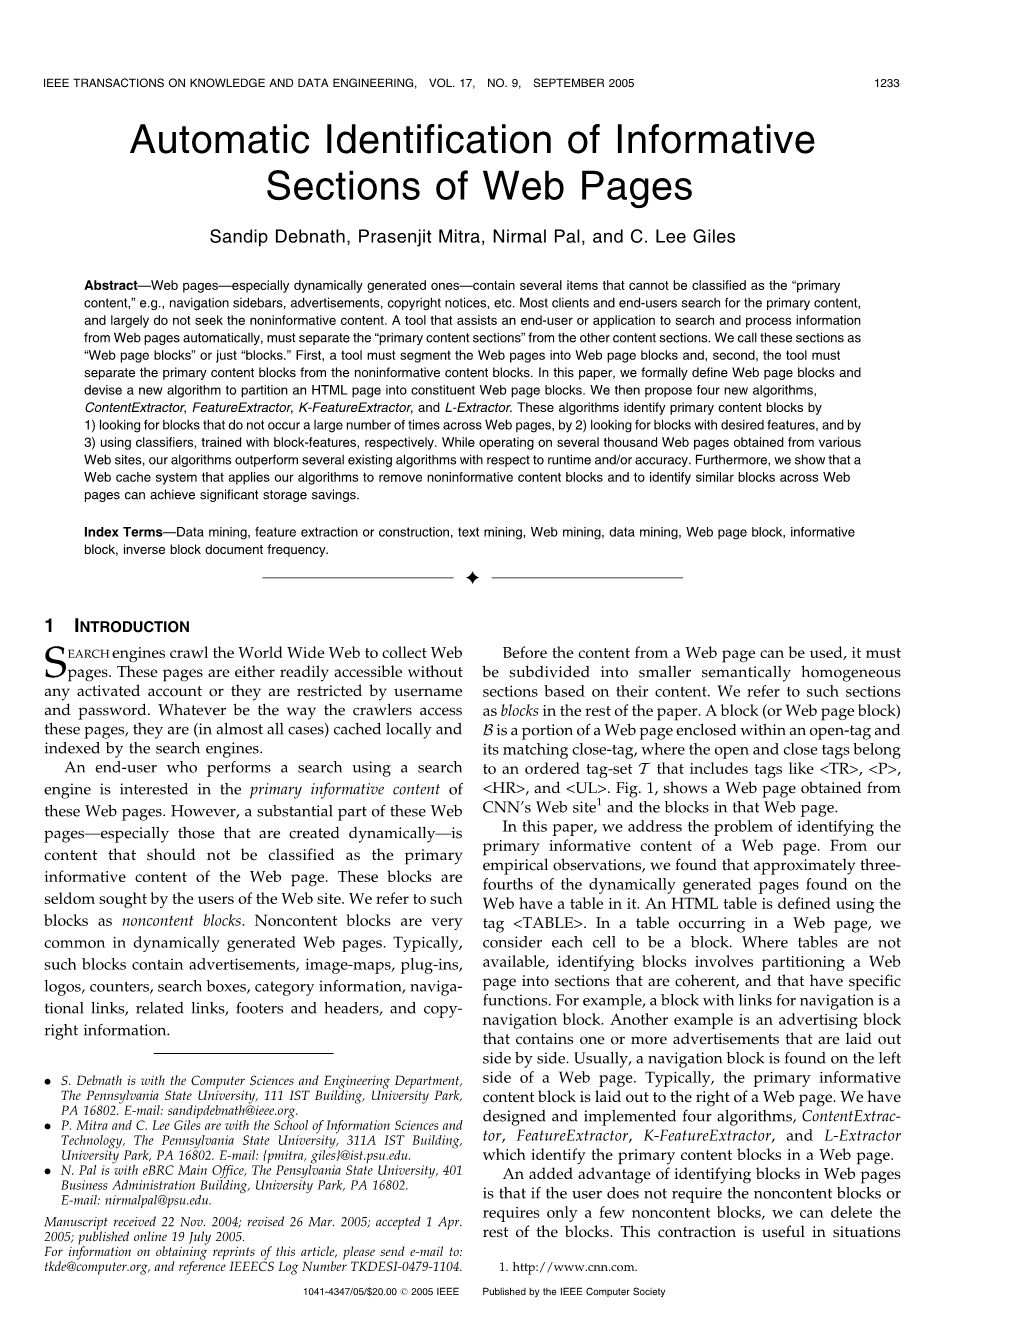 Automatic Identification of Informative Sections of Web Pages